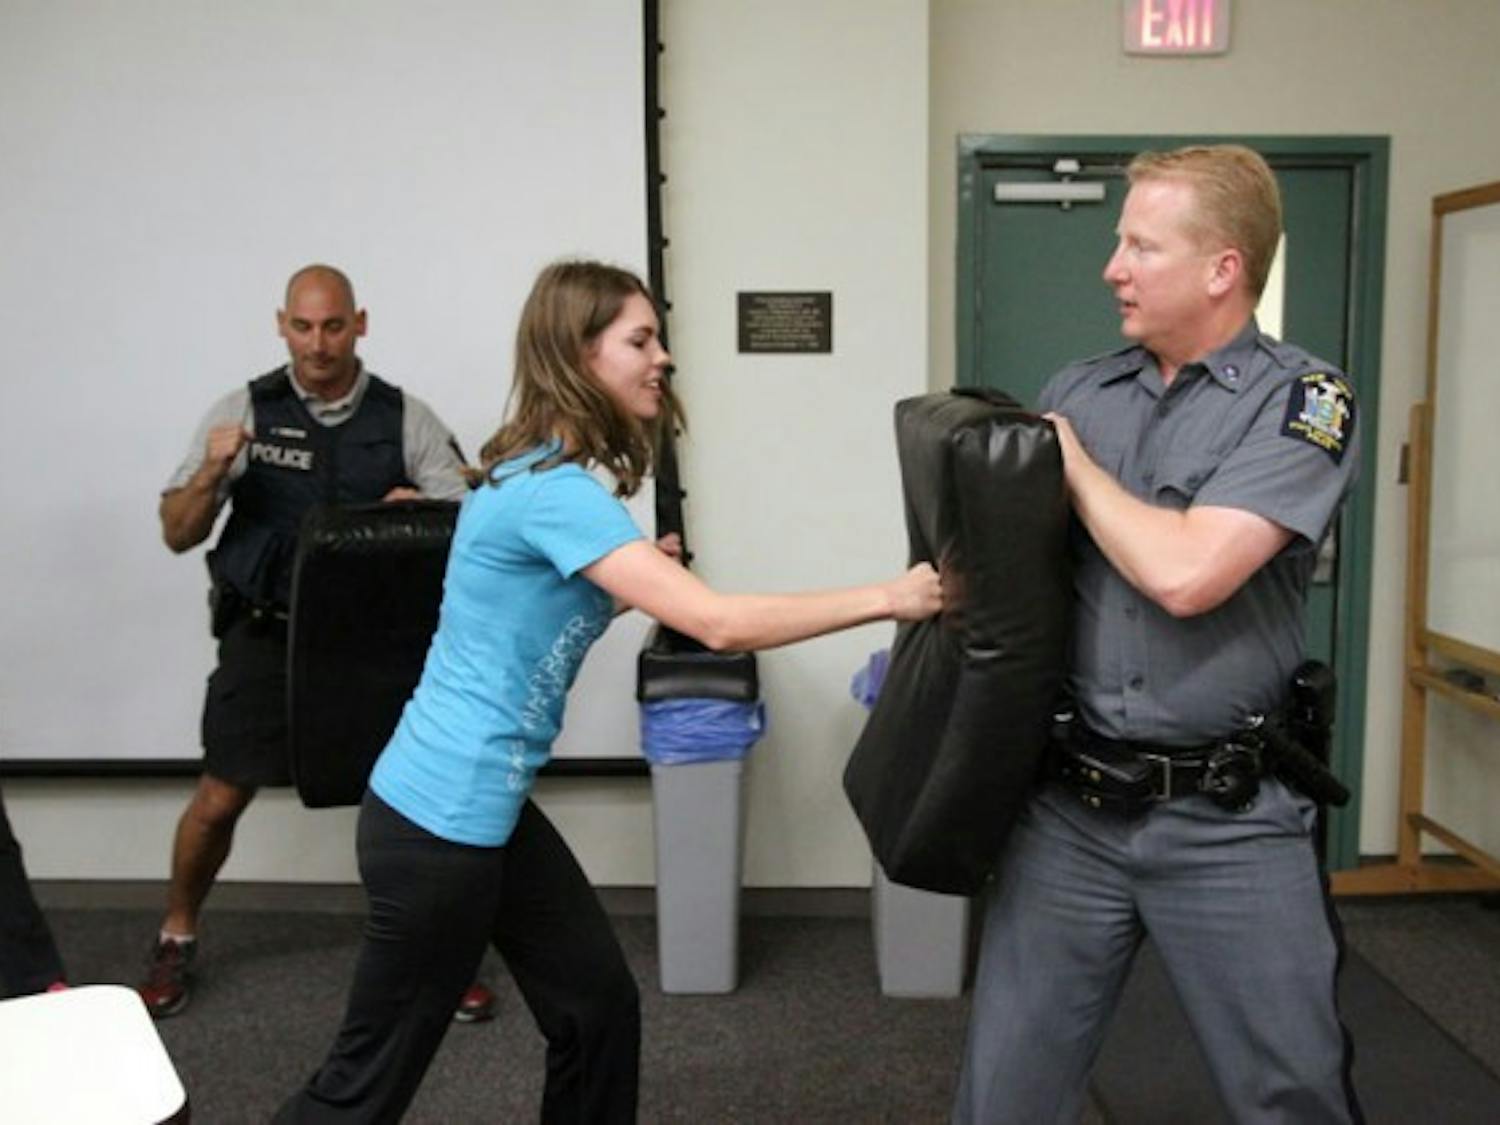 Kristin Jorgali, president of UB Women in Management club (left) and UB police officer Sergio Disanto (right) practice self-defense. According to Disanto, situational awareness is the key to effective self-defense.&nbsp;Derek Drocy, The Spectrum